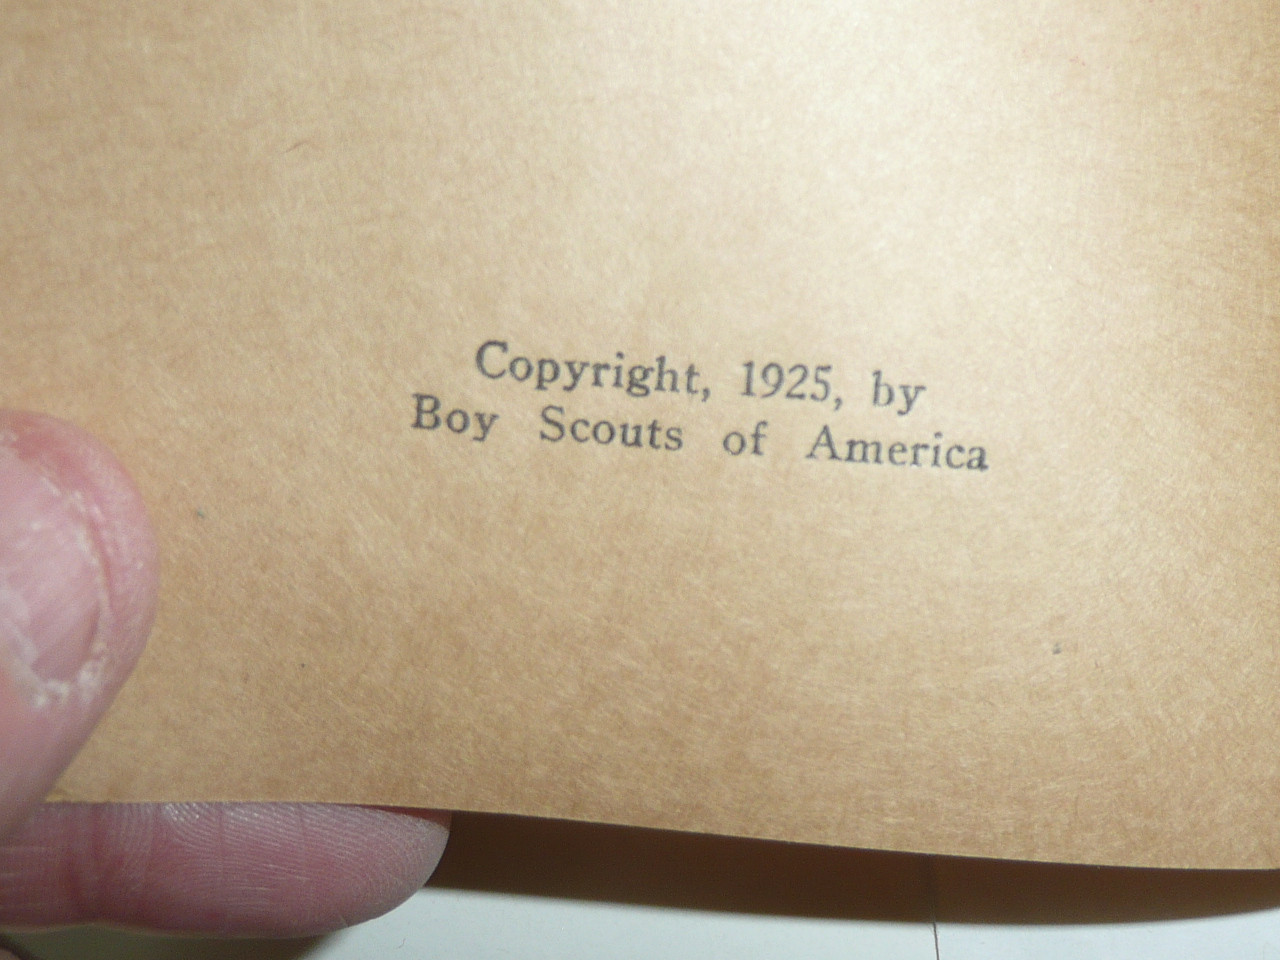 Physical Development Merit Badge Pamphlet, Type 3, Tan Cover, 1925 Printing, Mint condition